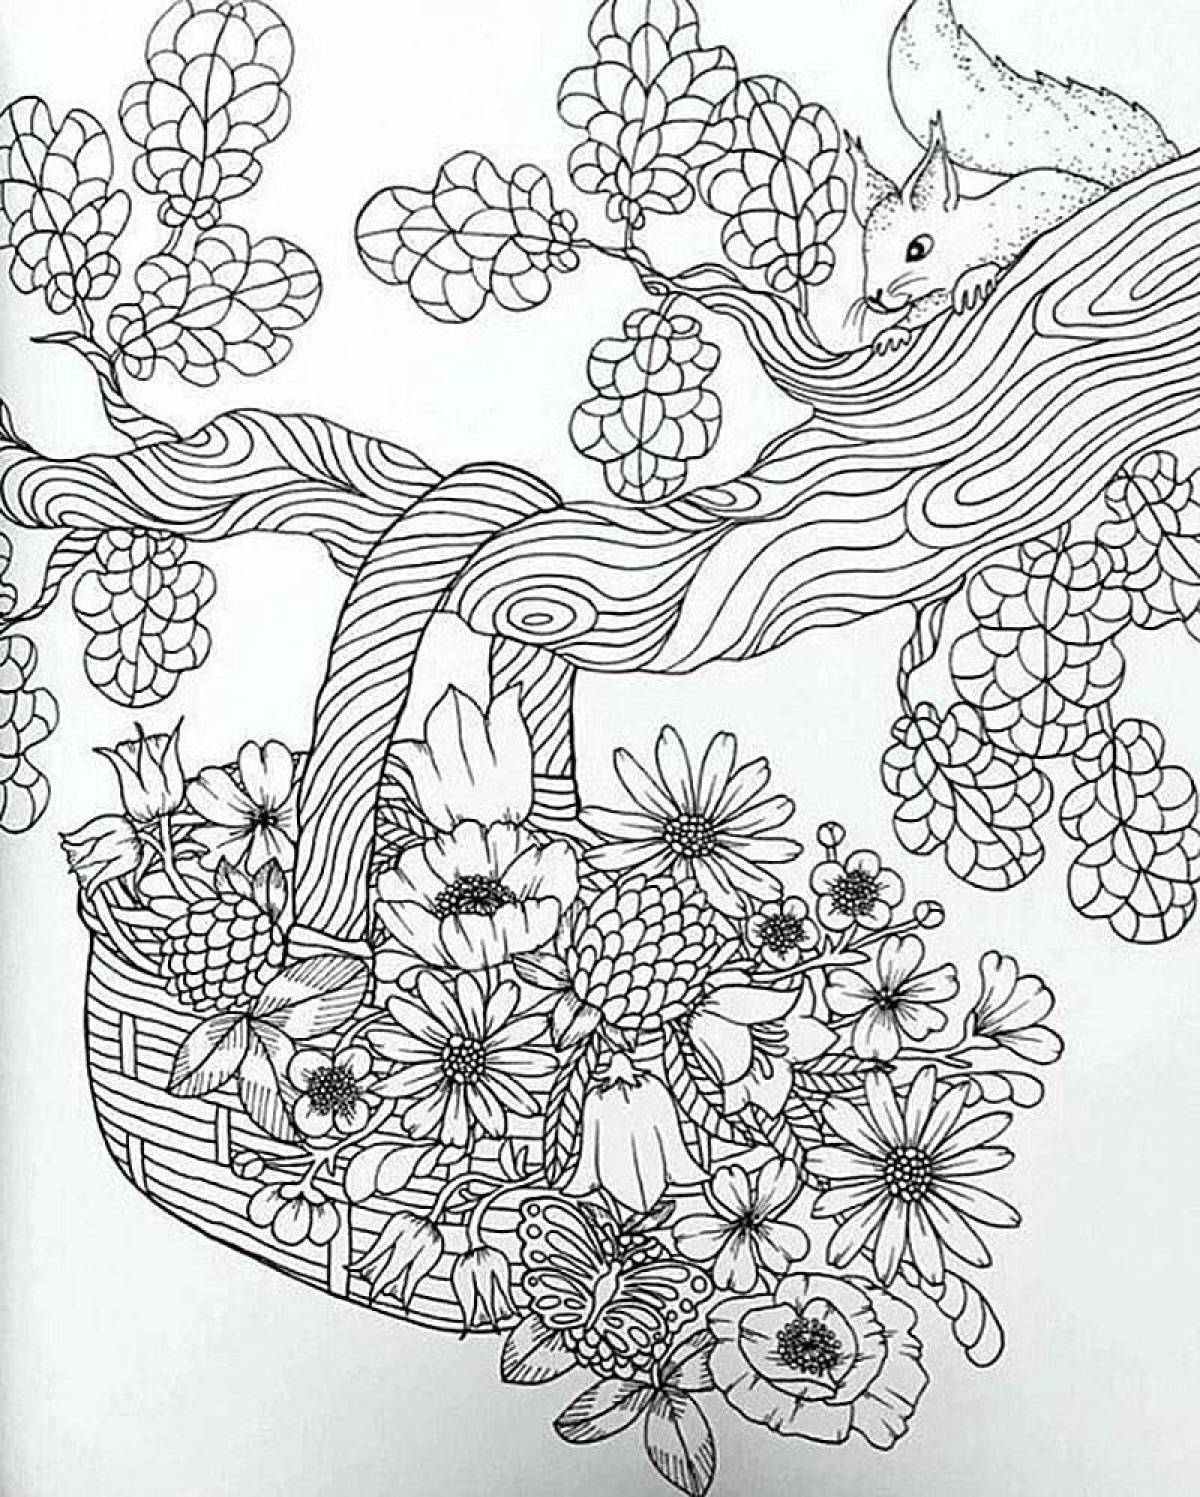 Serene anti-stress coloring book for adults